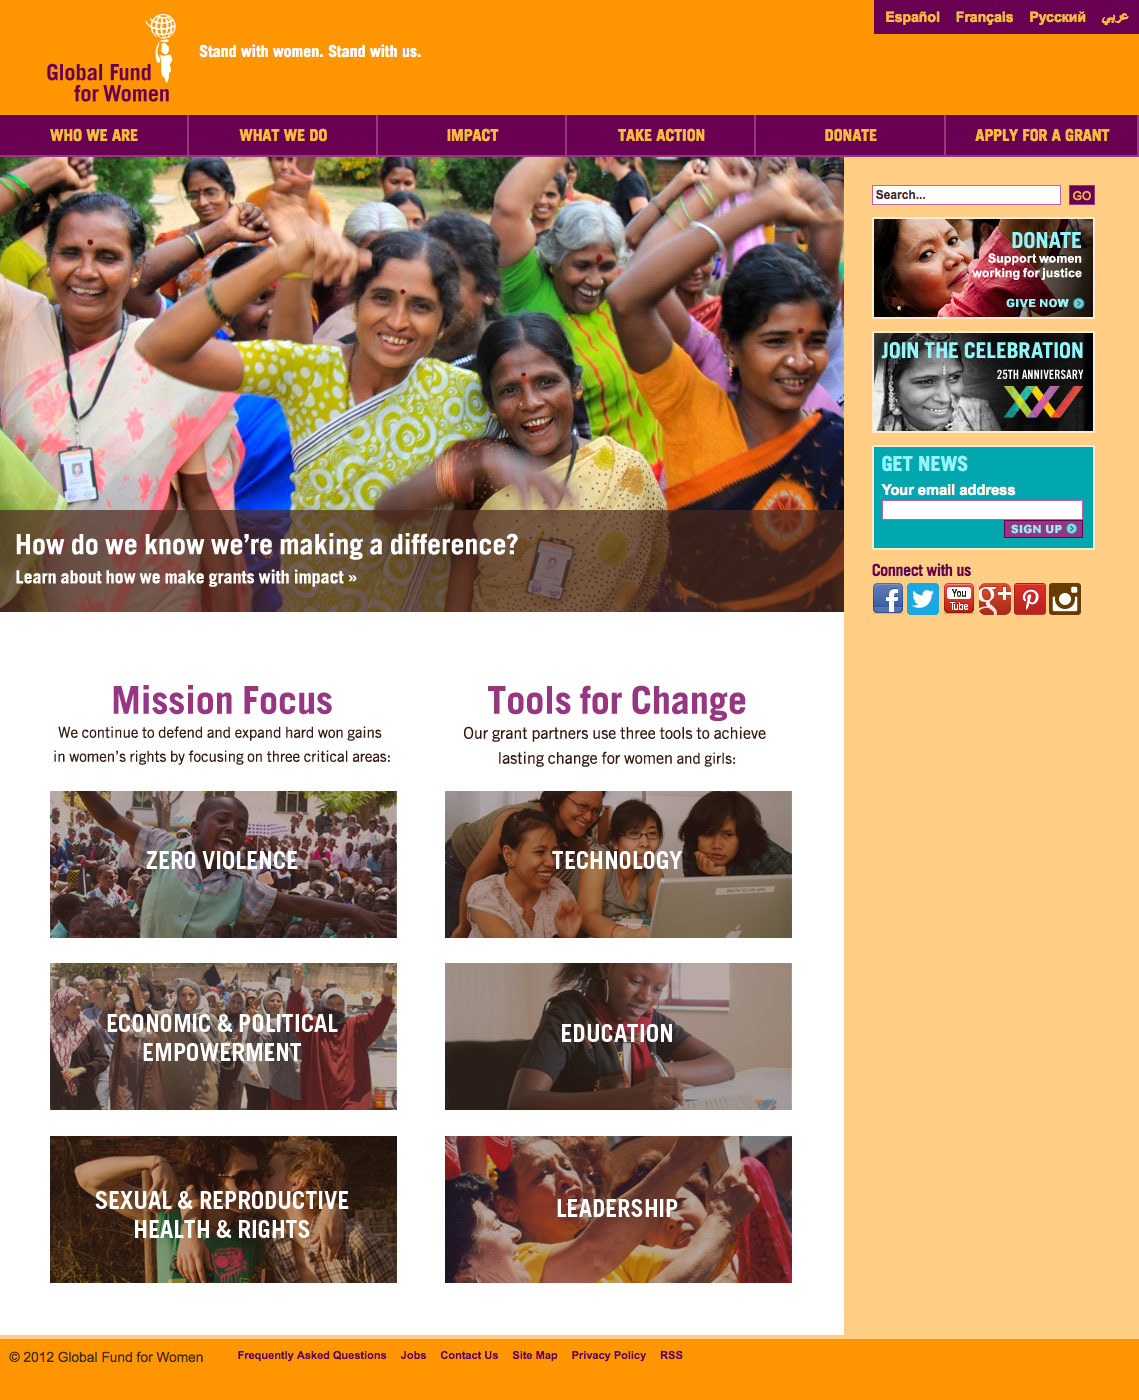 homepage of globalfundforwomen.org showing three-column layout with prominent engagement and donation opportunities